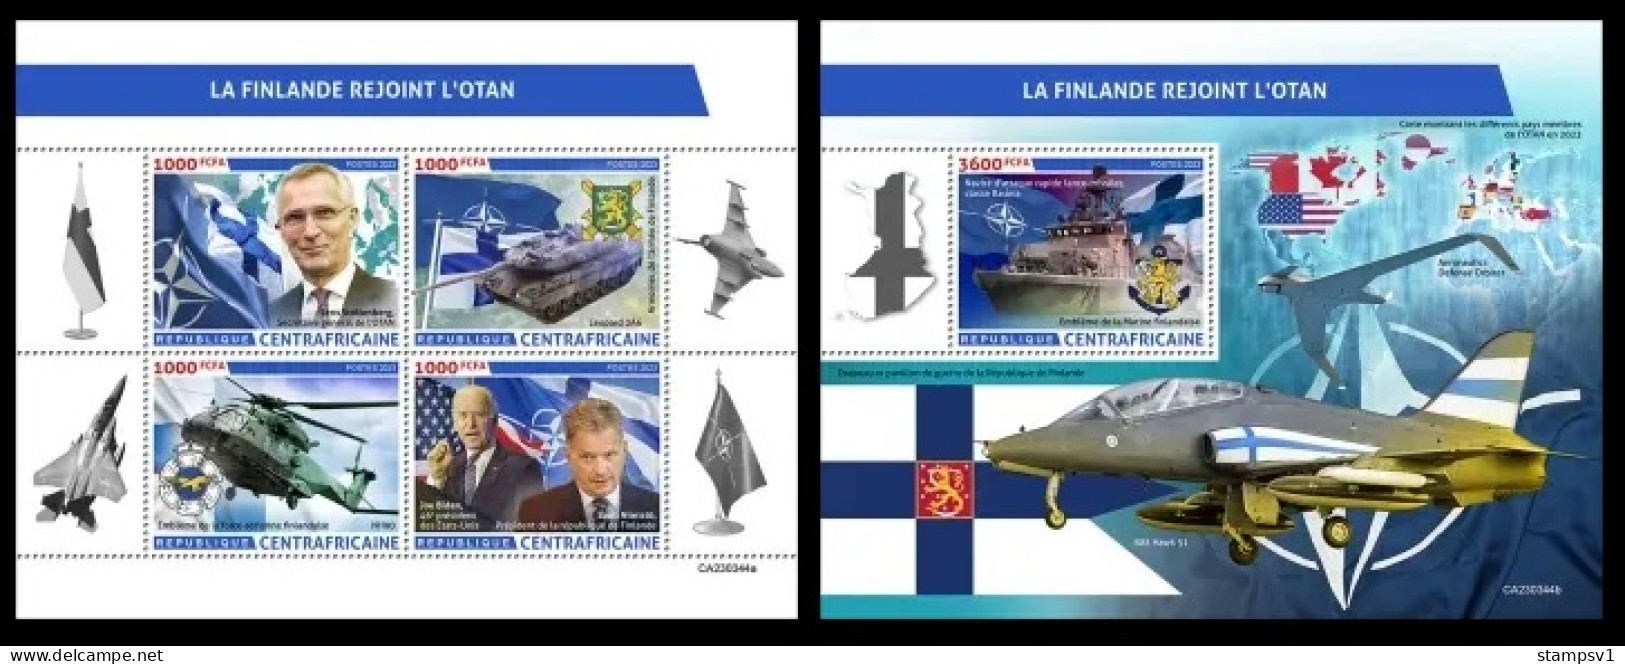 Central Africa 2023 Finland Joins NATO. (344) OFFICIAL ISSUE - OTAN